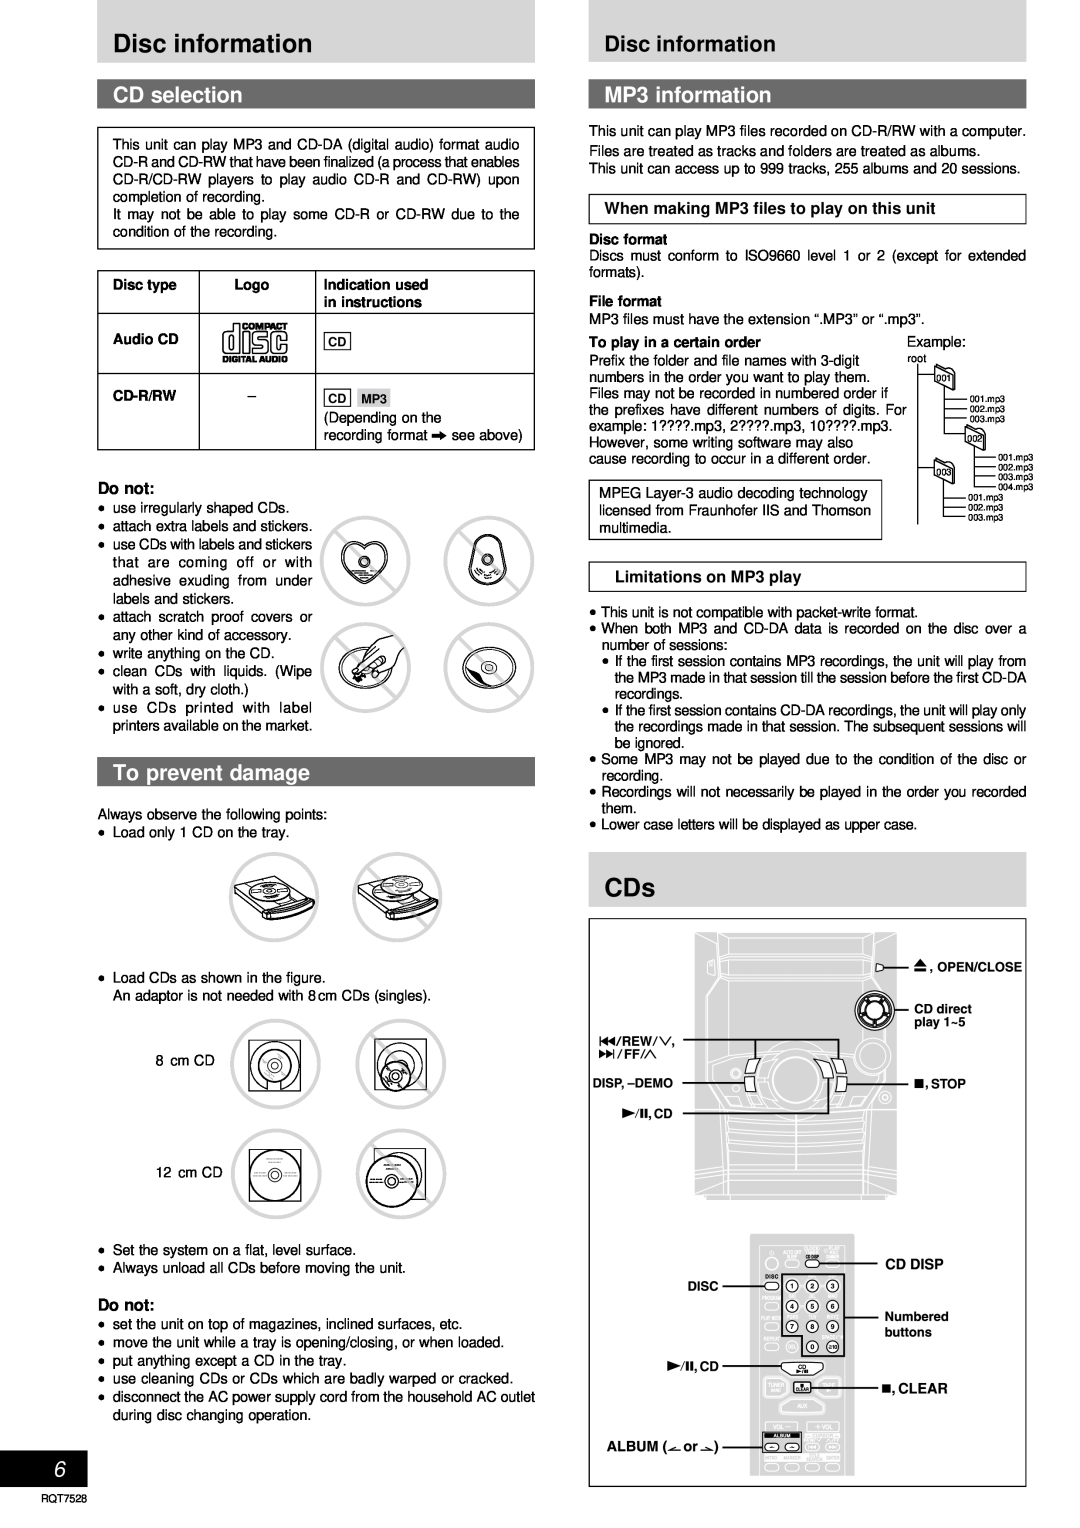 Panasonic SC-AK220 operating instructions Disc information, CD selection, MP3 information, To prevent damage 